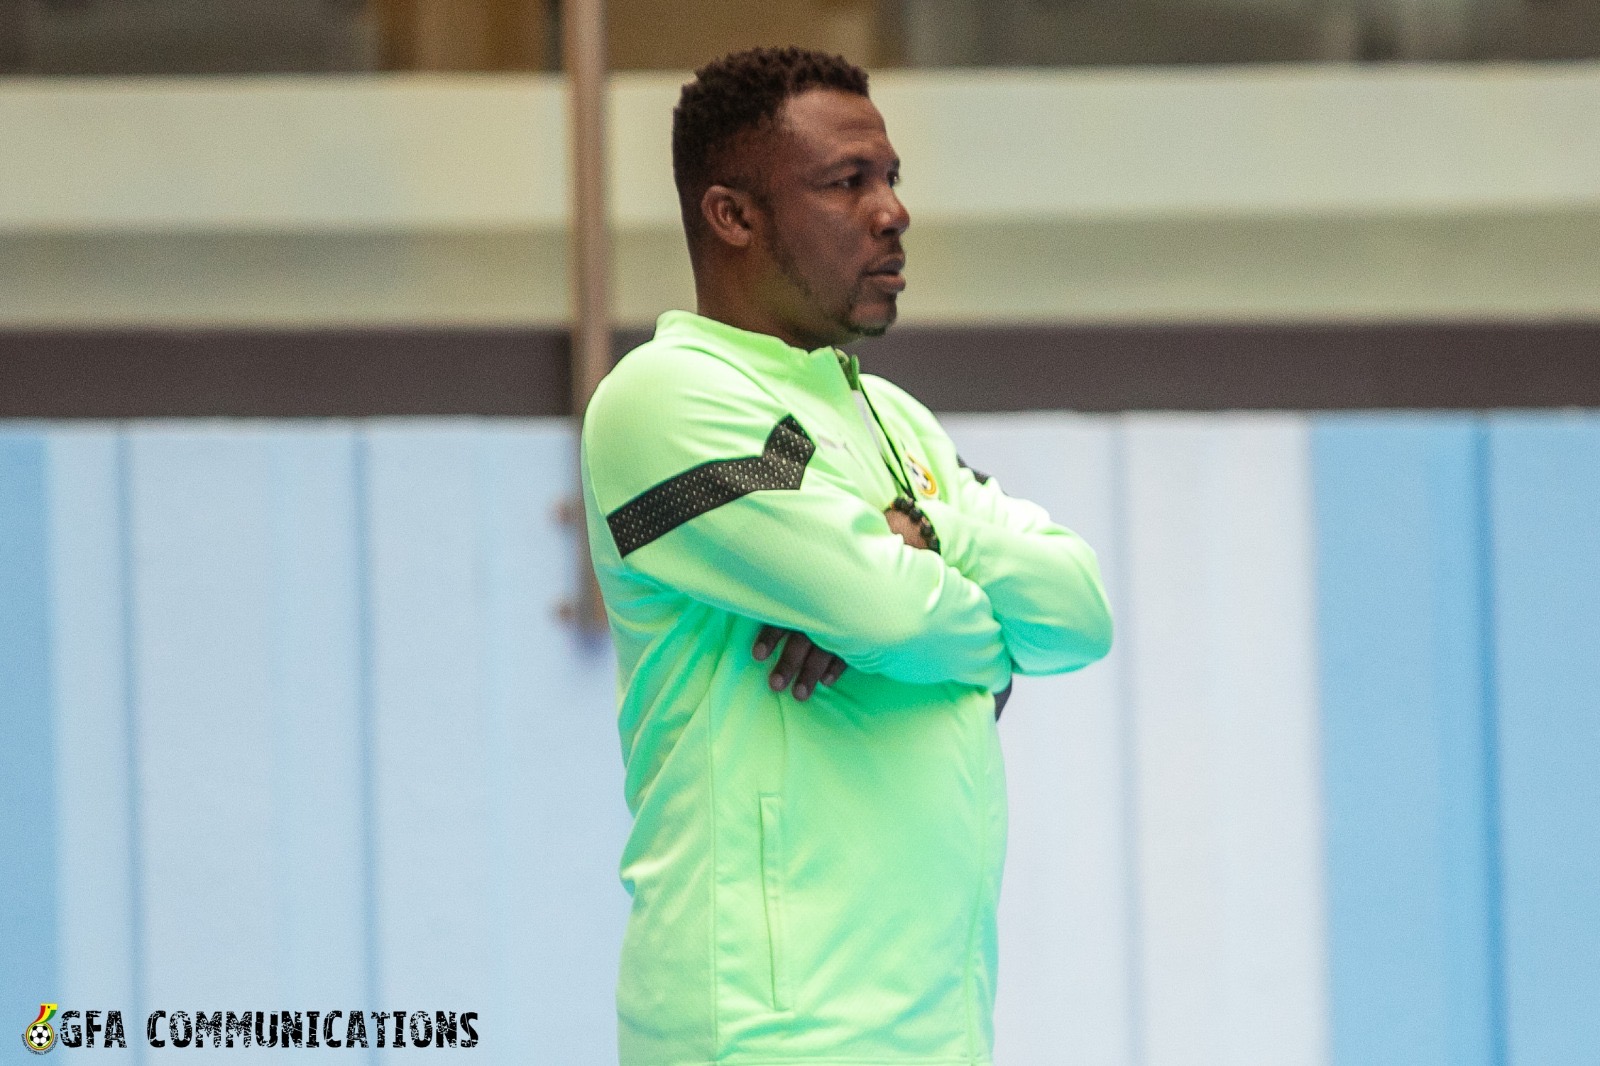 We learned a lot from participating in Futsal AFCON – Ghana coach Philip Boakye